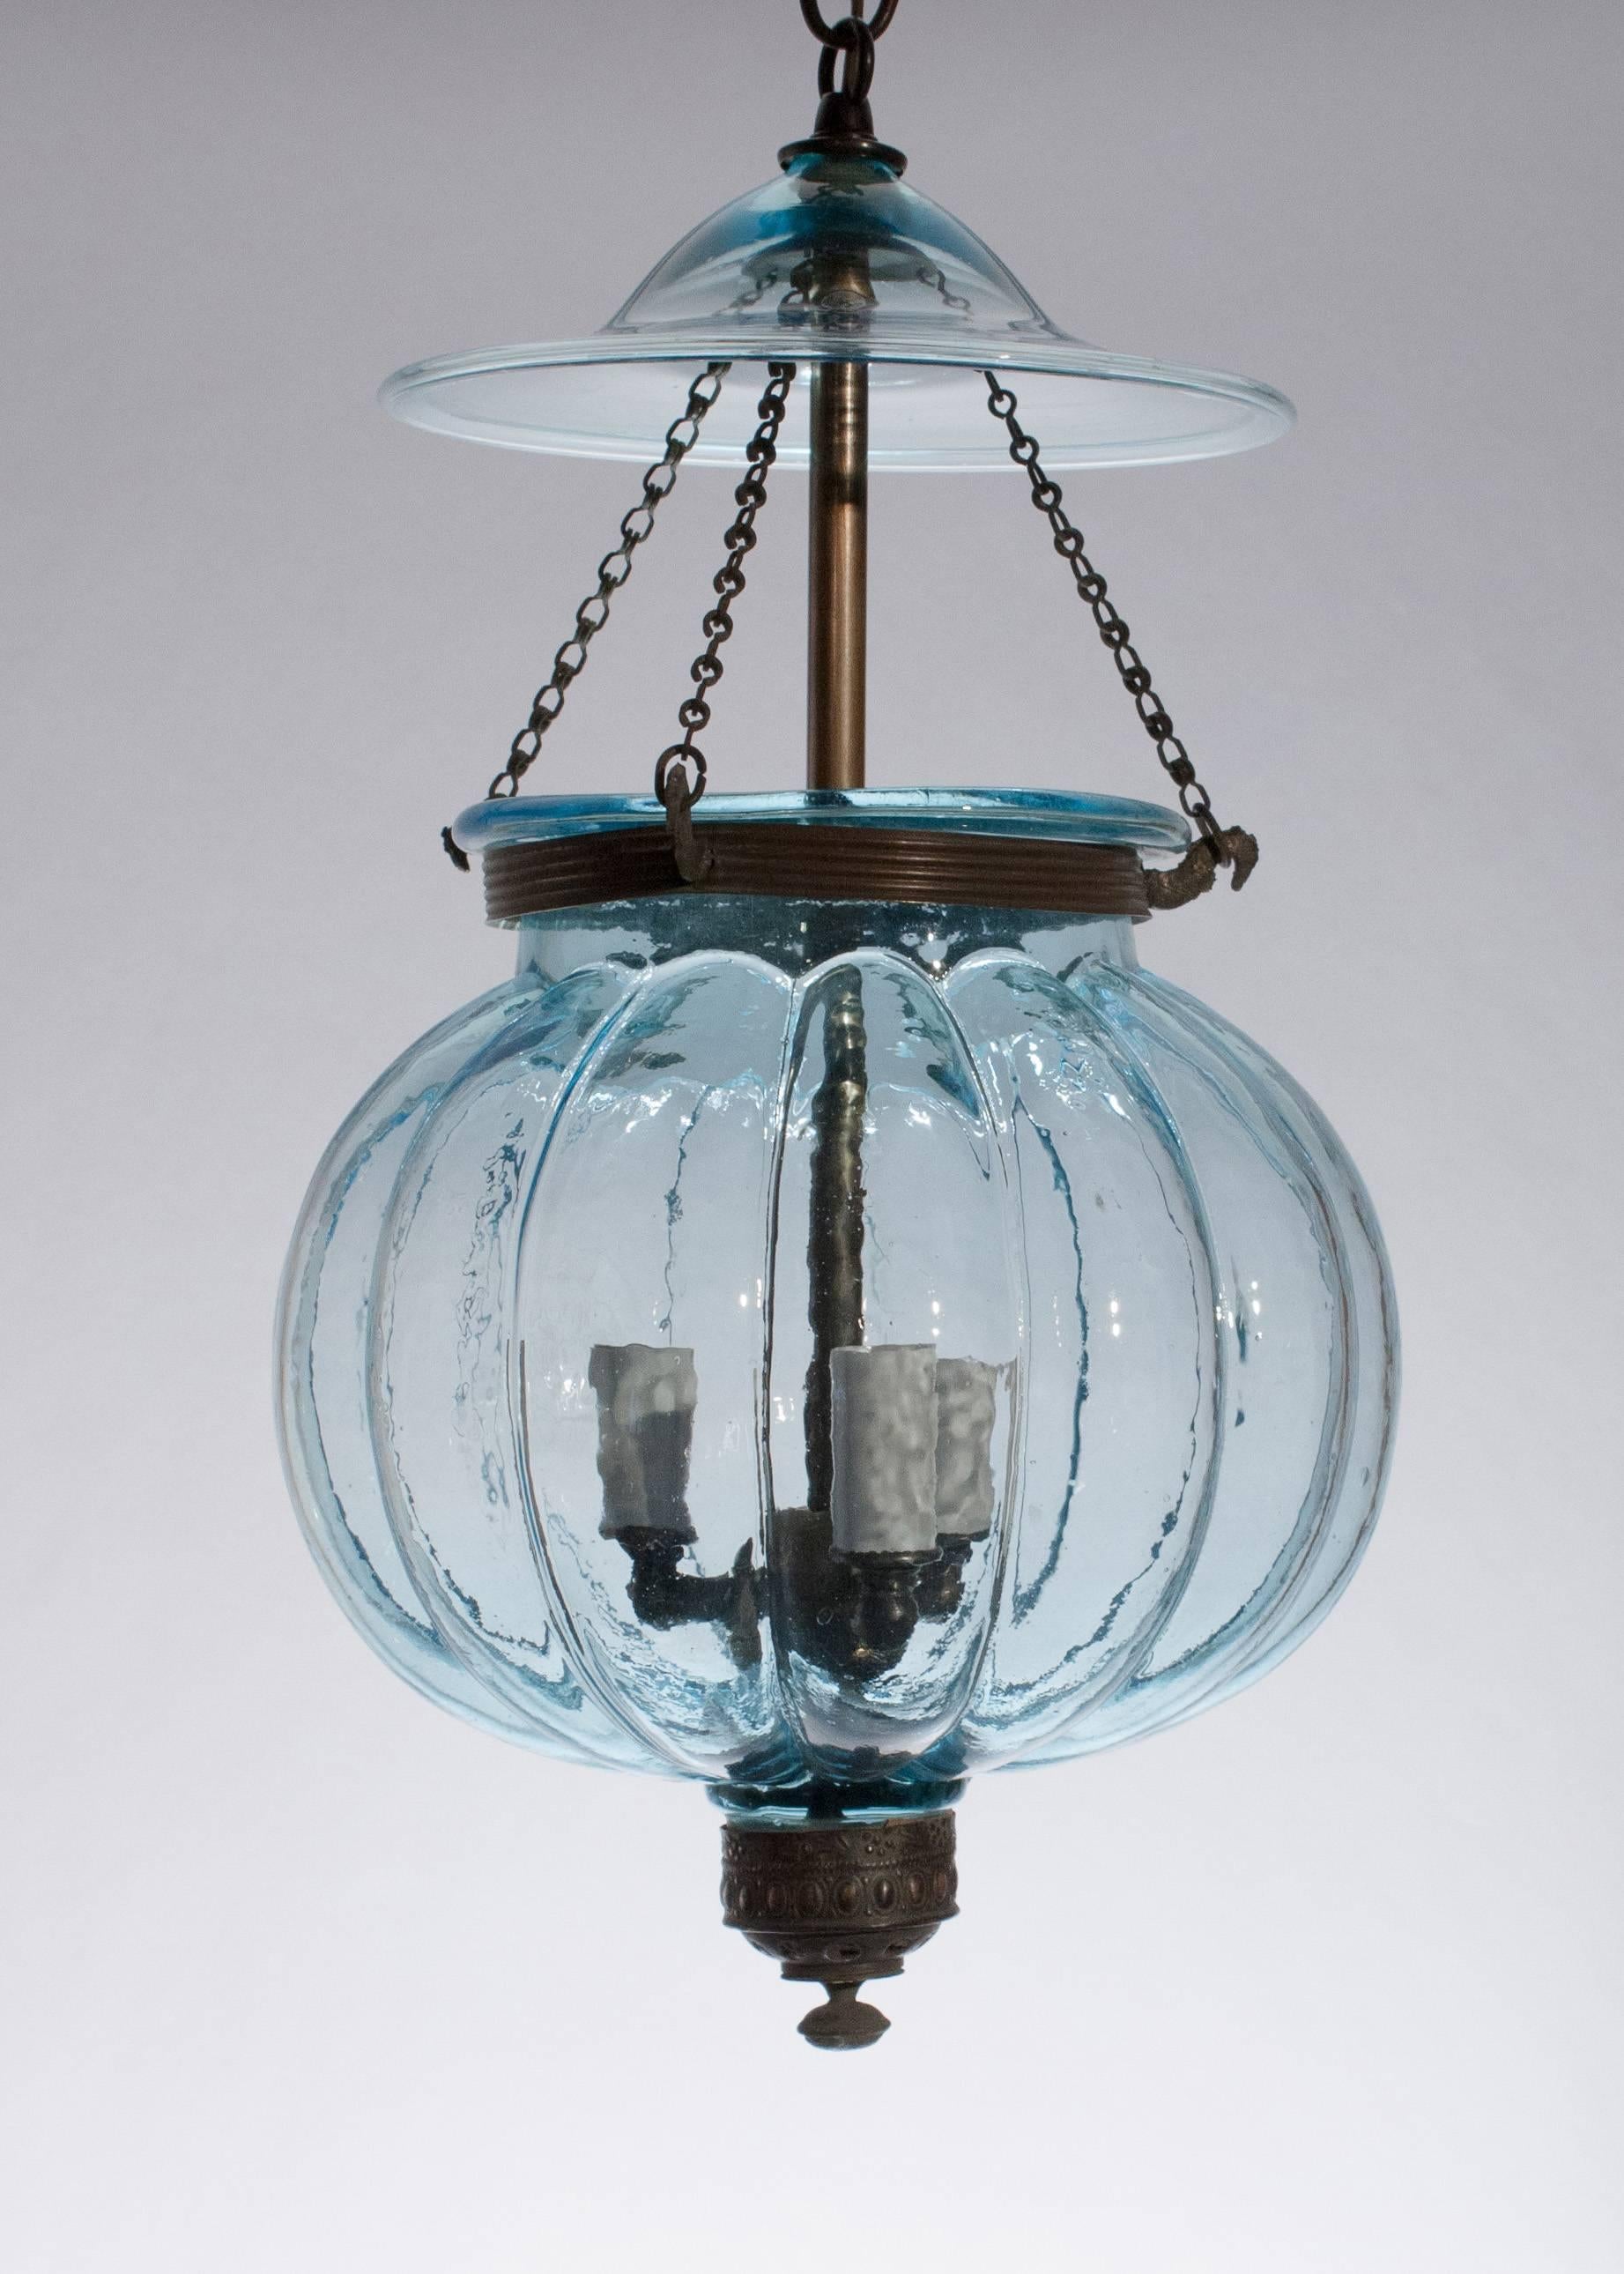 Pale aqua-tinted blue melon bell jar lantern handblown in Belgium by Val Saint Lambert, circa 1860. The St. Lambert insignia is acid etched in the glass, along with the words 